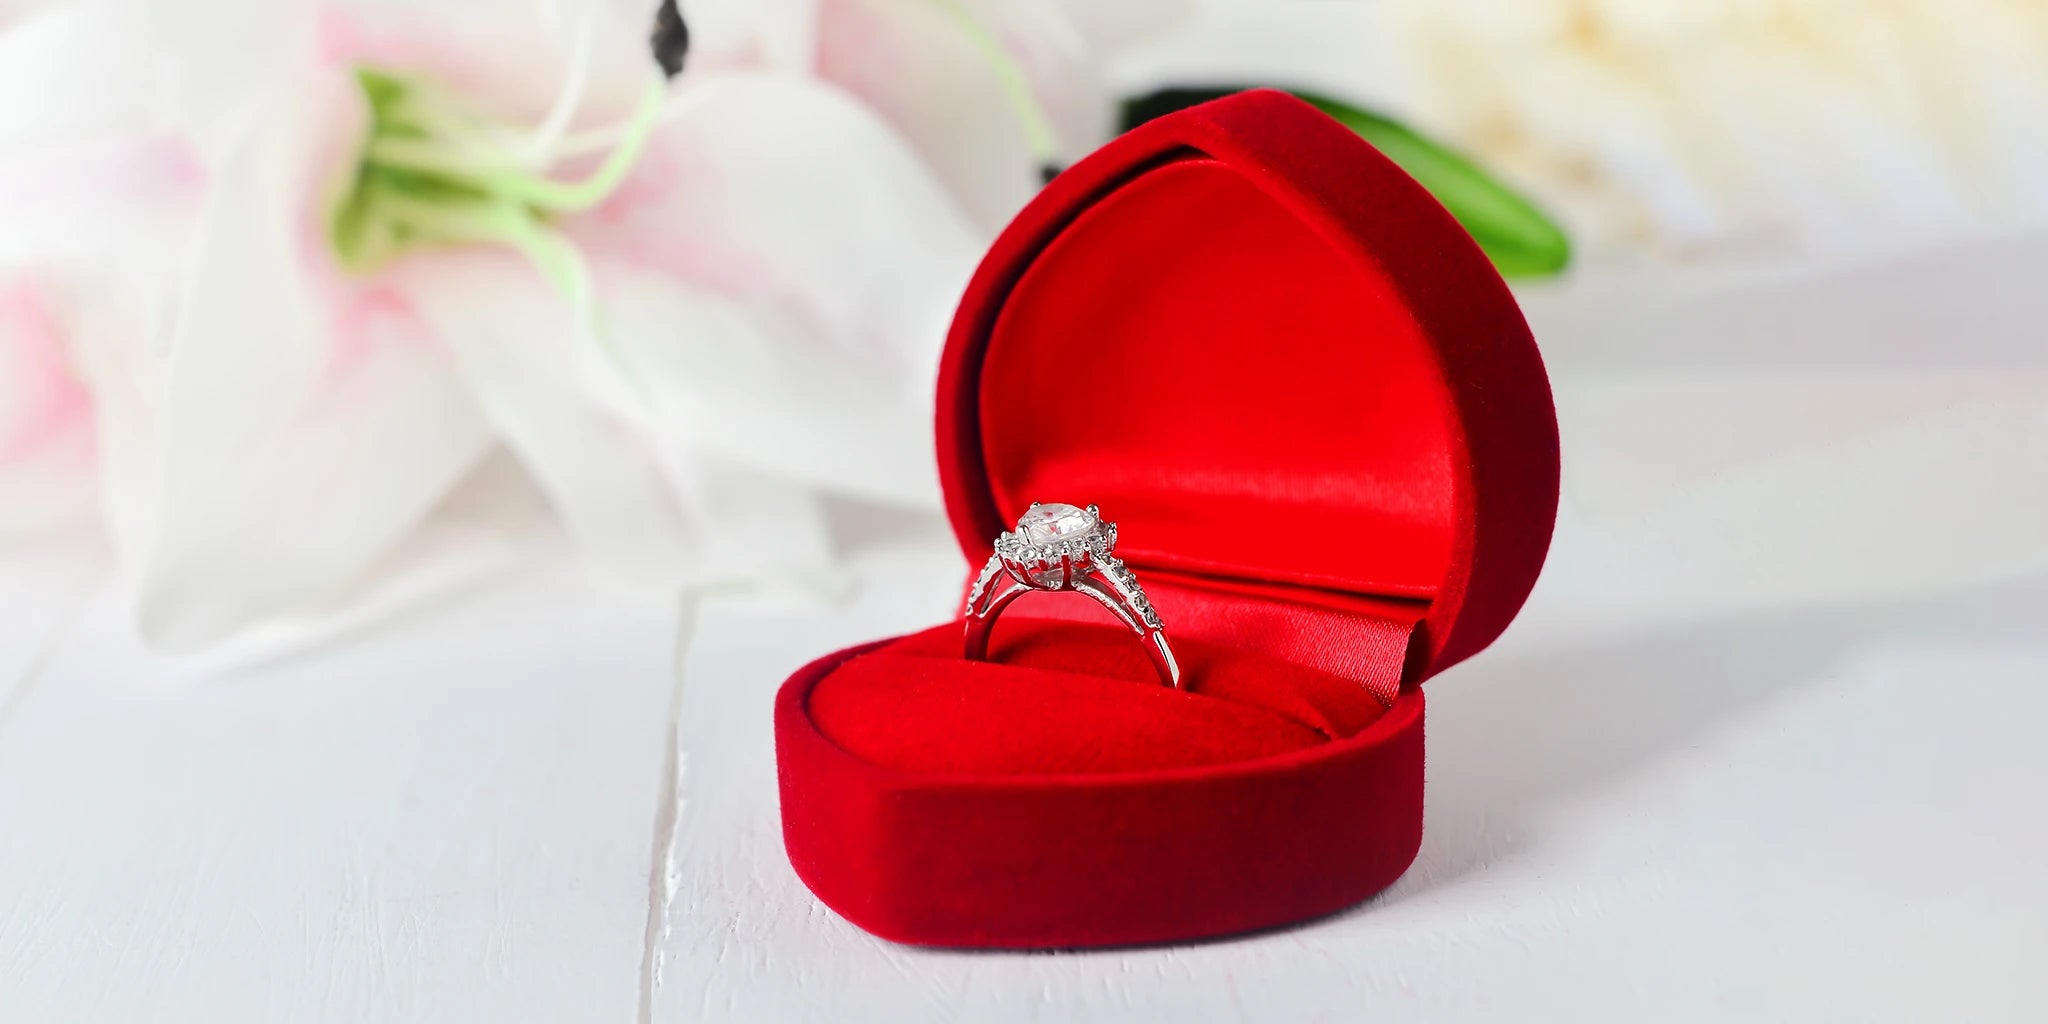 Precious diamond engagement white gold ring for women in red jewelry box to be gifted as a love sign for tie-up a relationship.